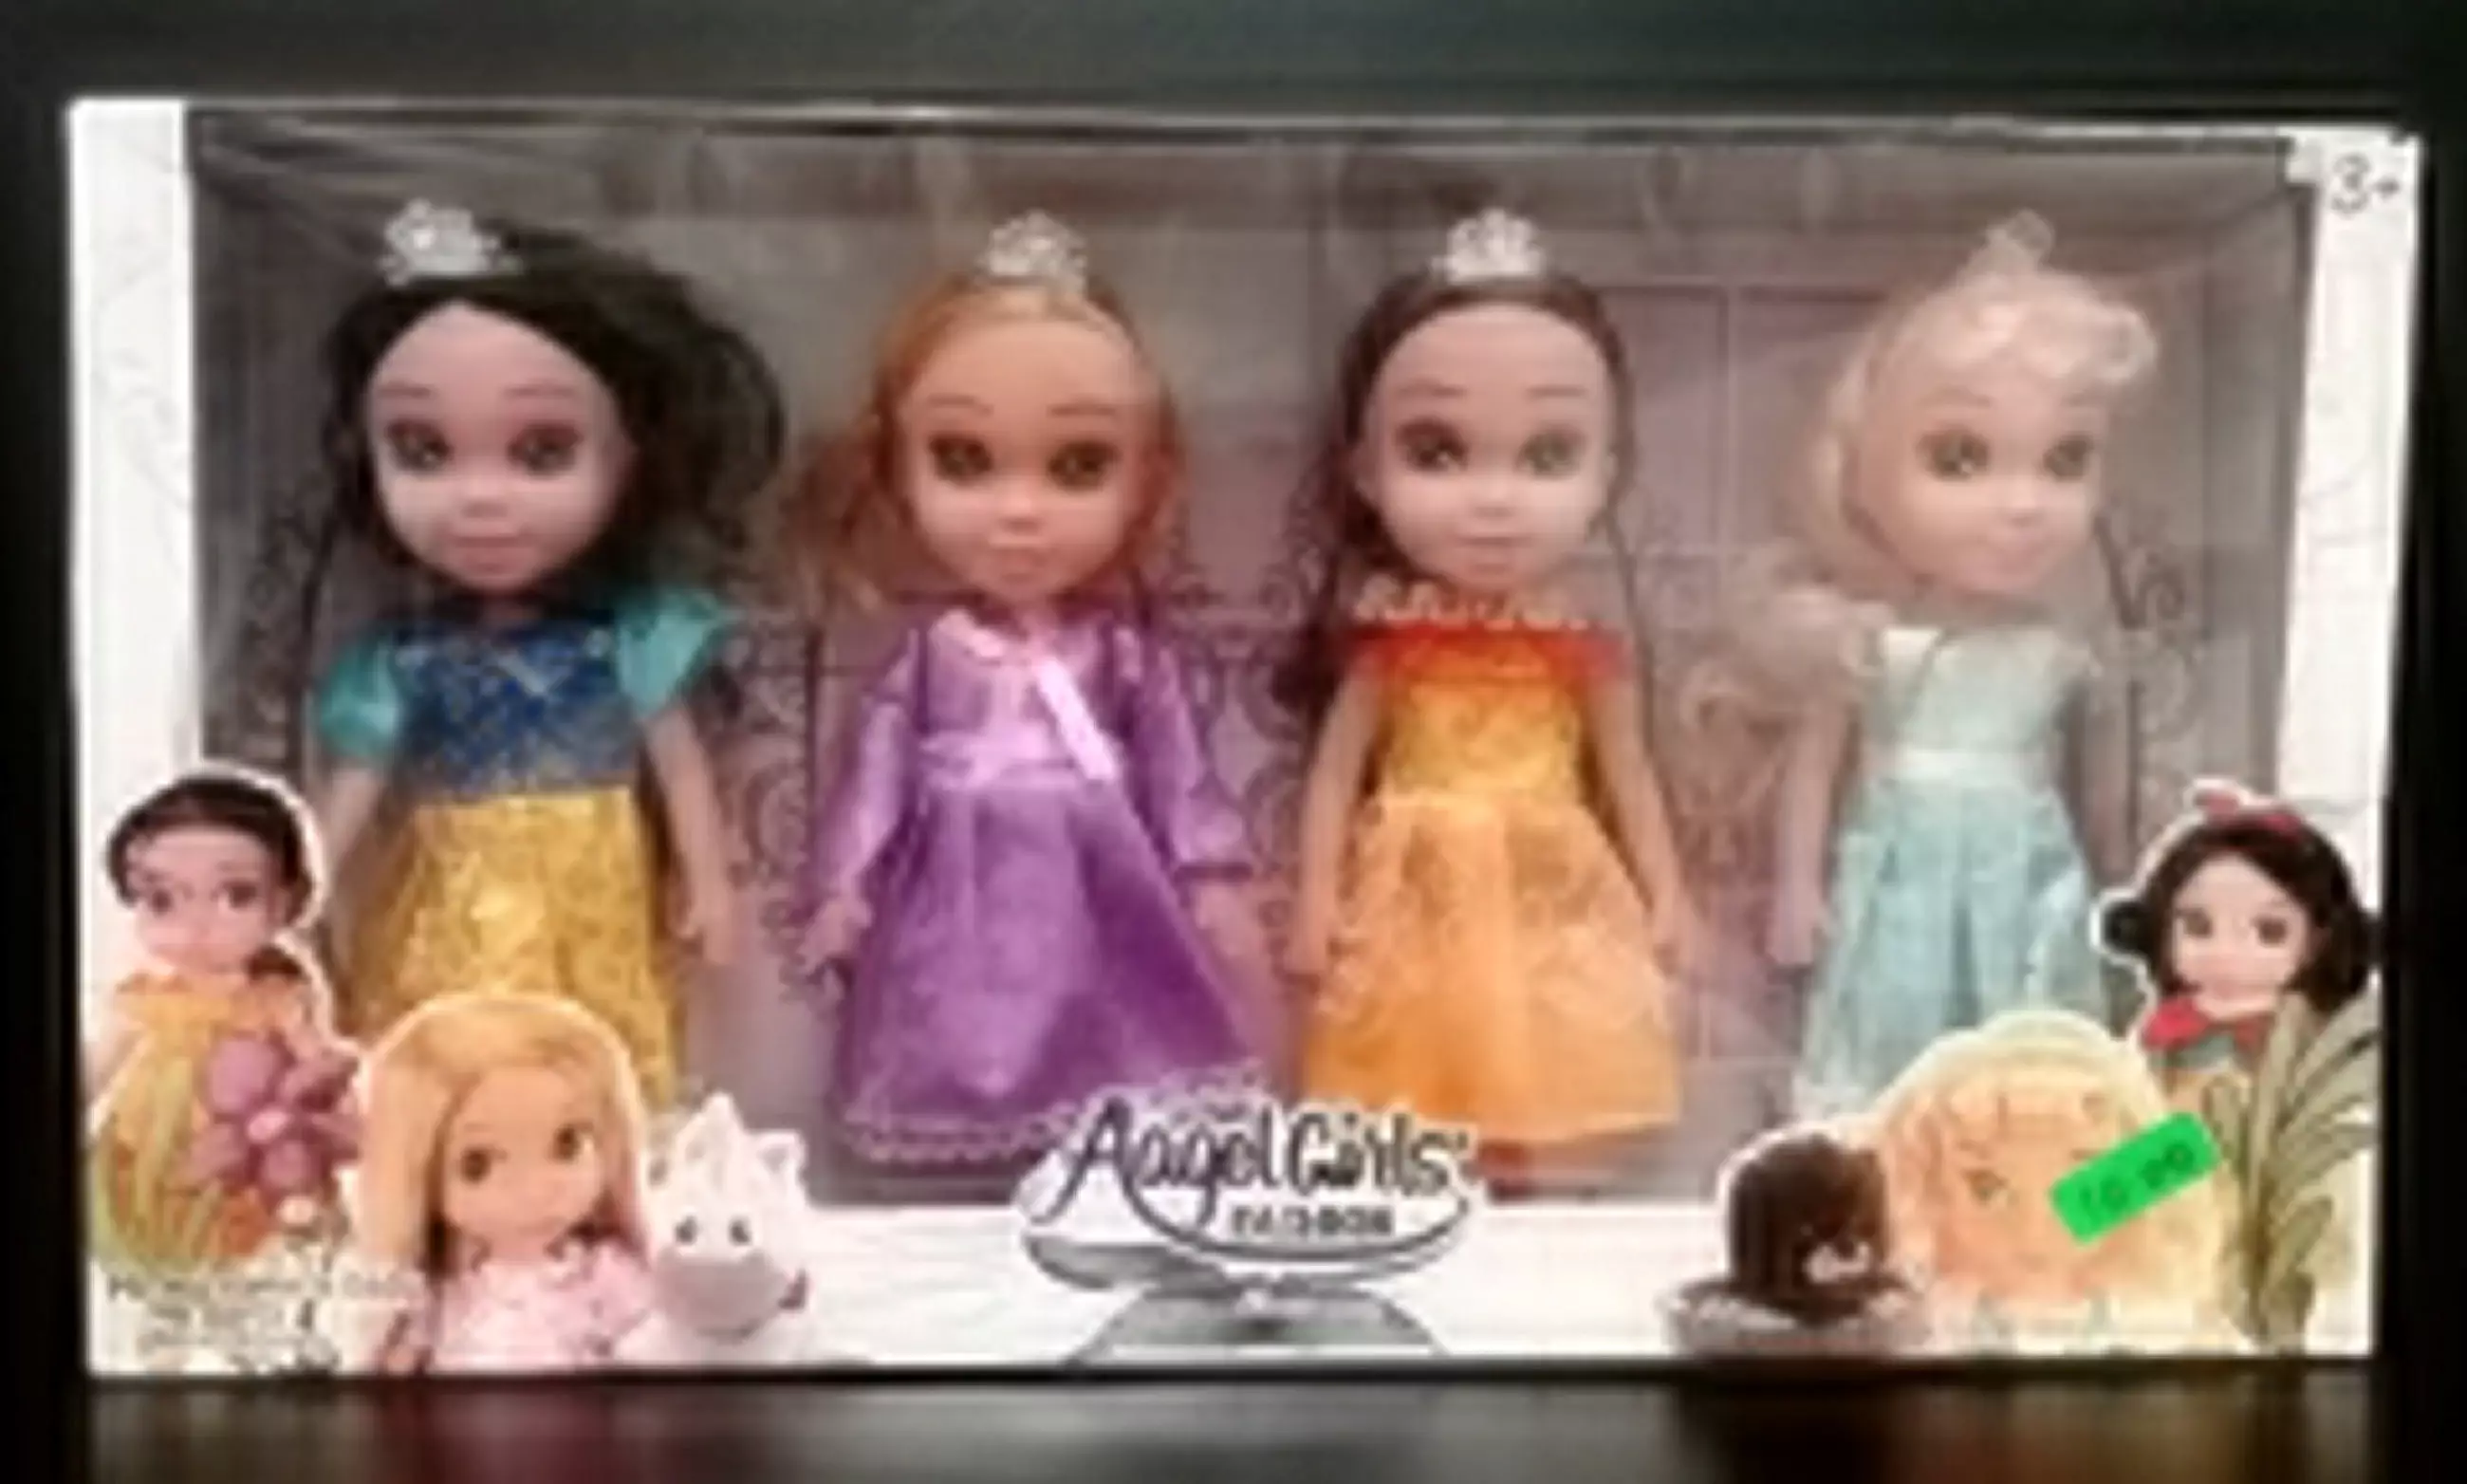 The Aangel Dolls were another item posing a risk to kids (